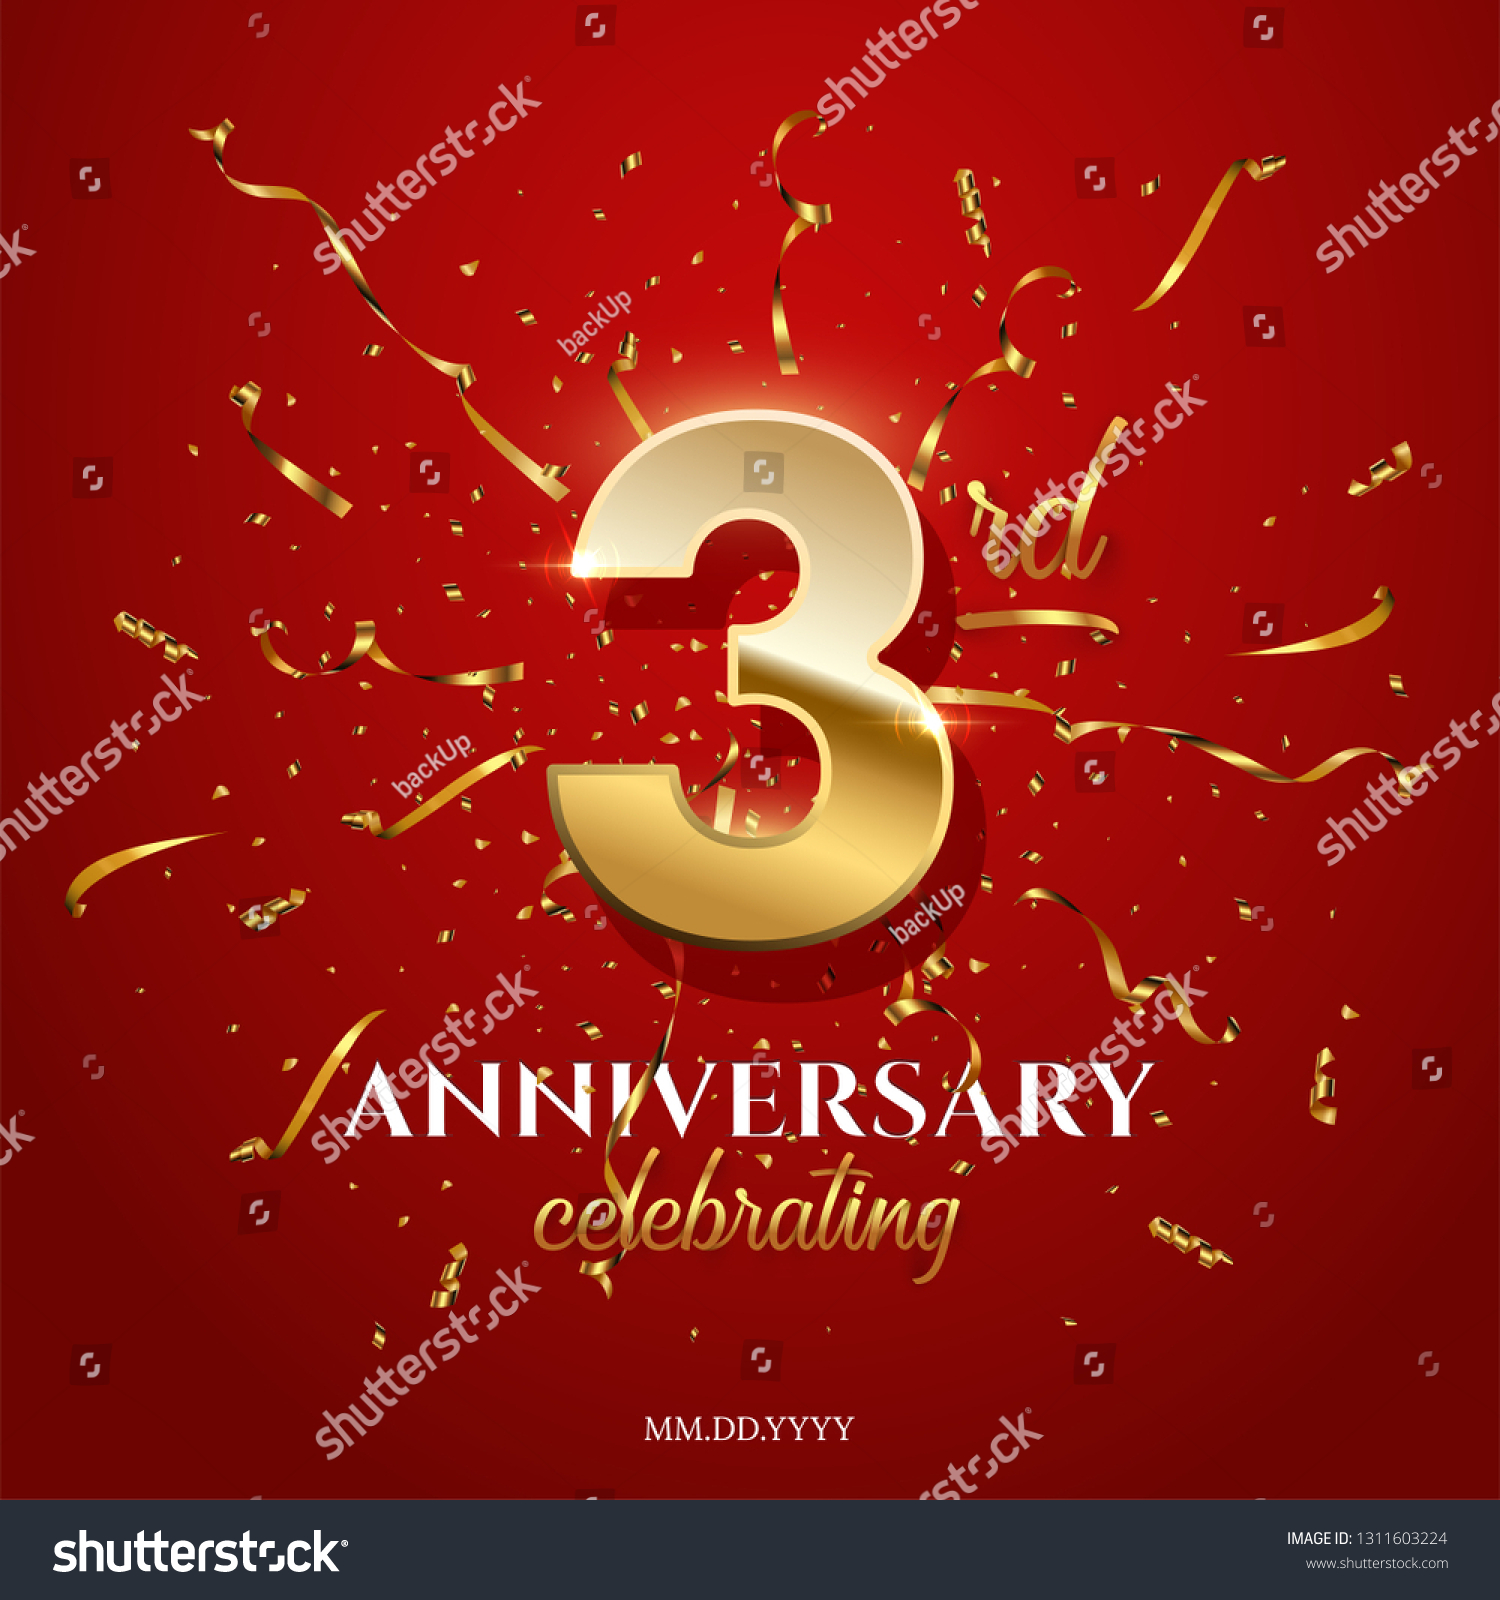 Third company anniversary Images, Stock Photos & Vectors | Shutterstock